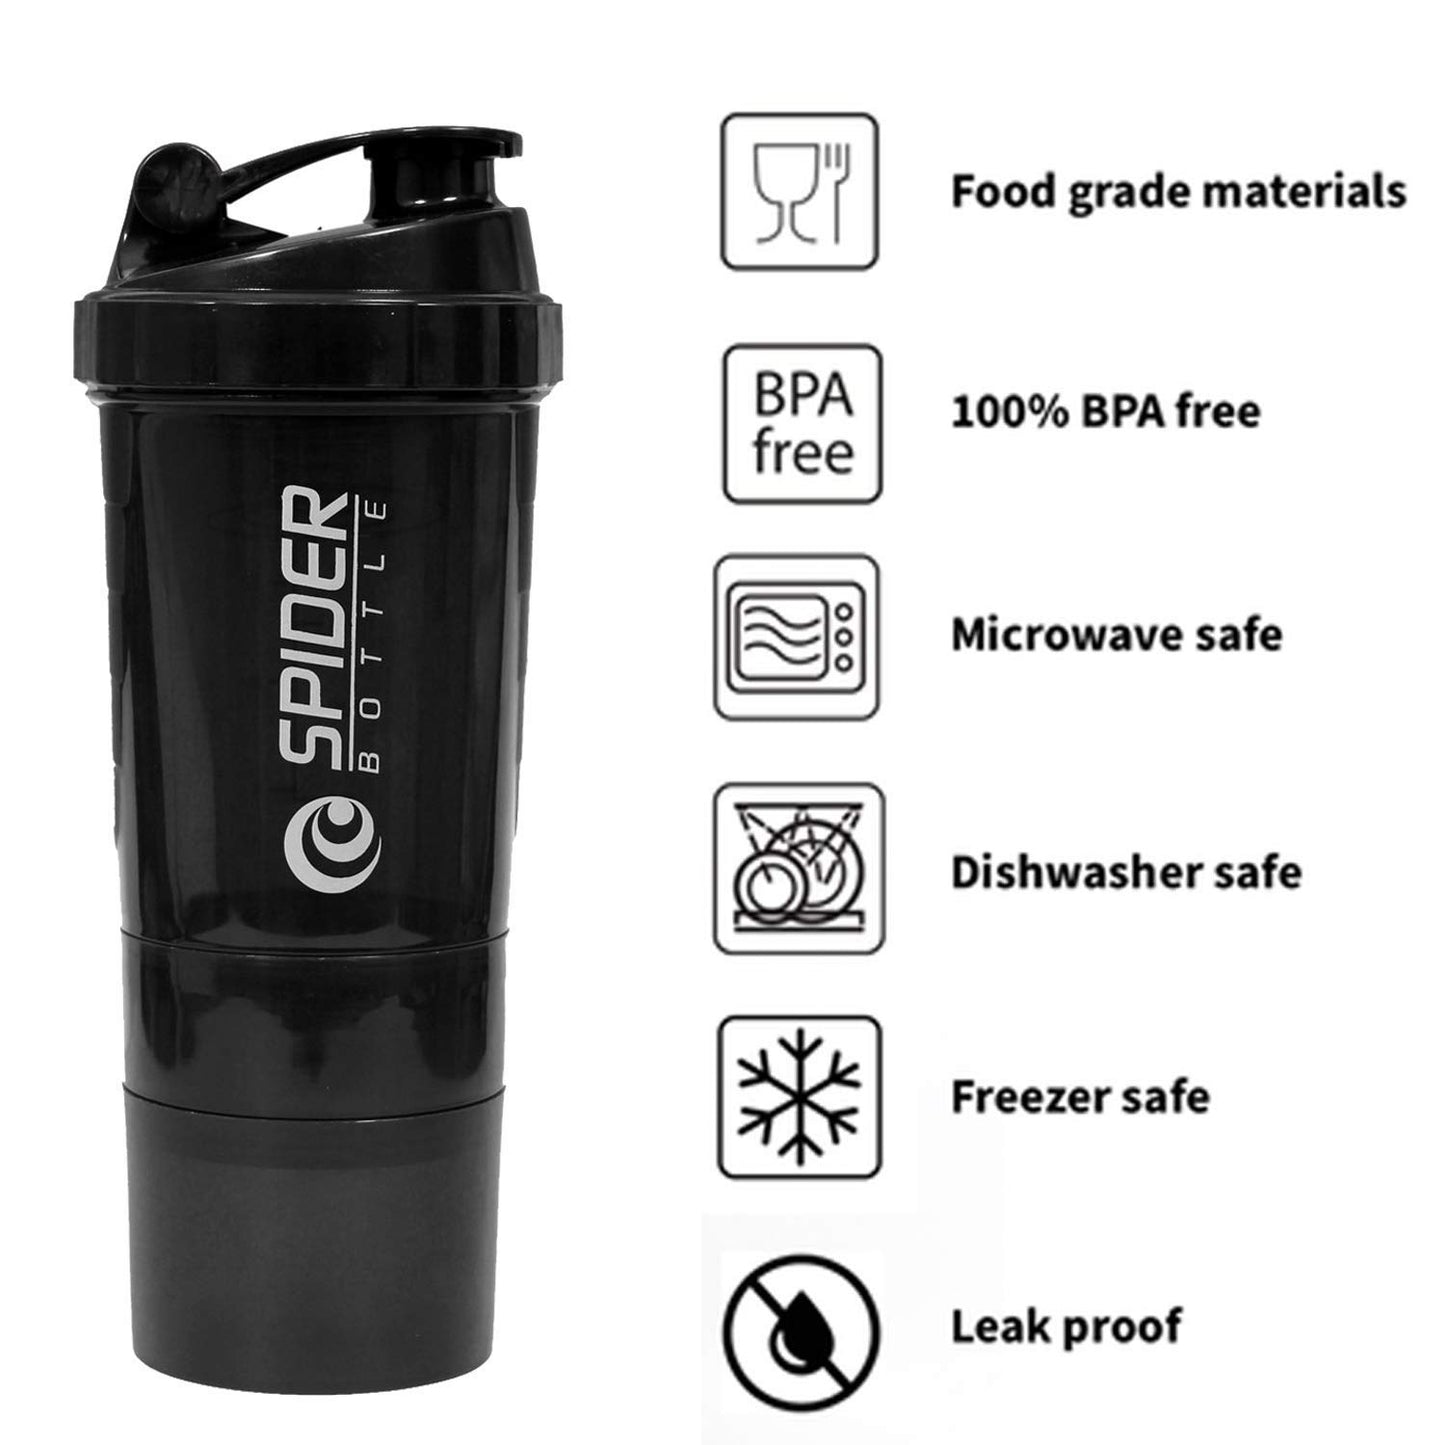 Spider Shaker Bottle for Protein and Gym use (Black-500ml)